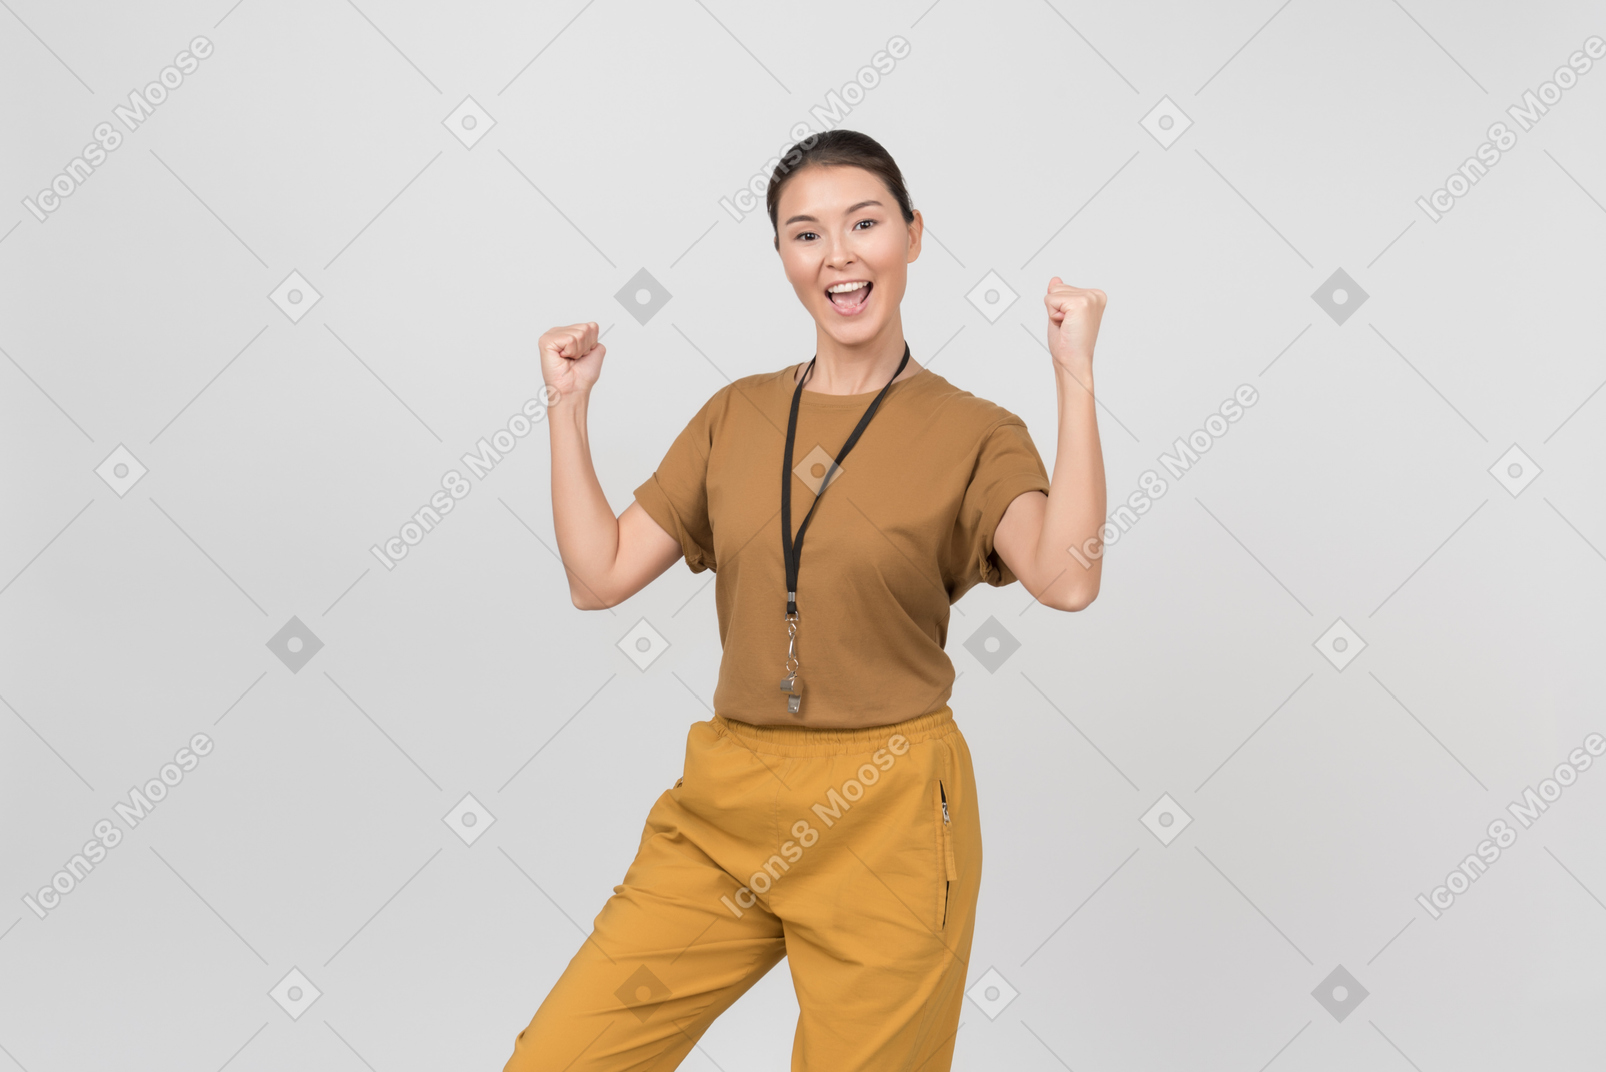 Young female pe teacher is excited and holding her hands up